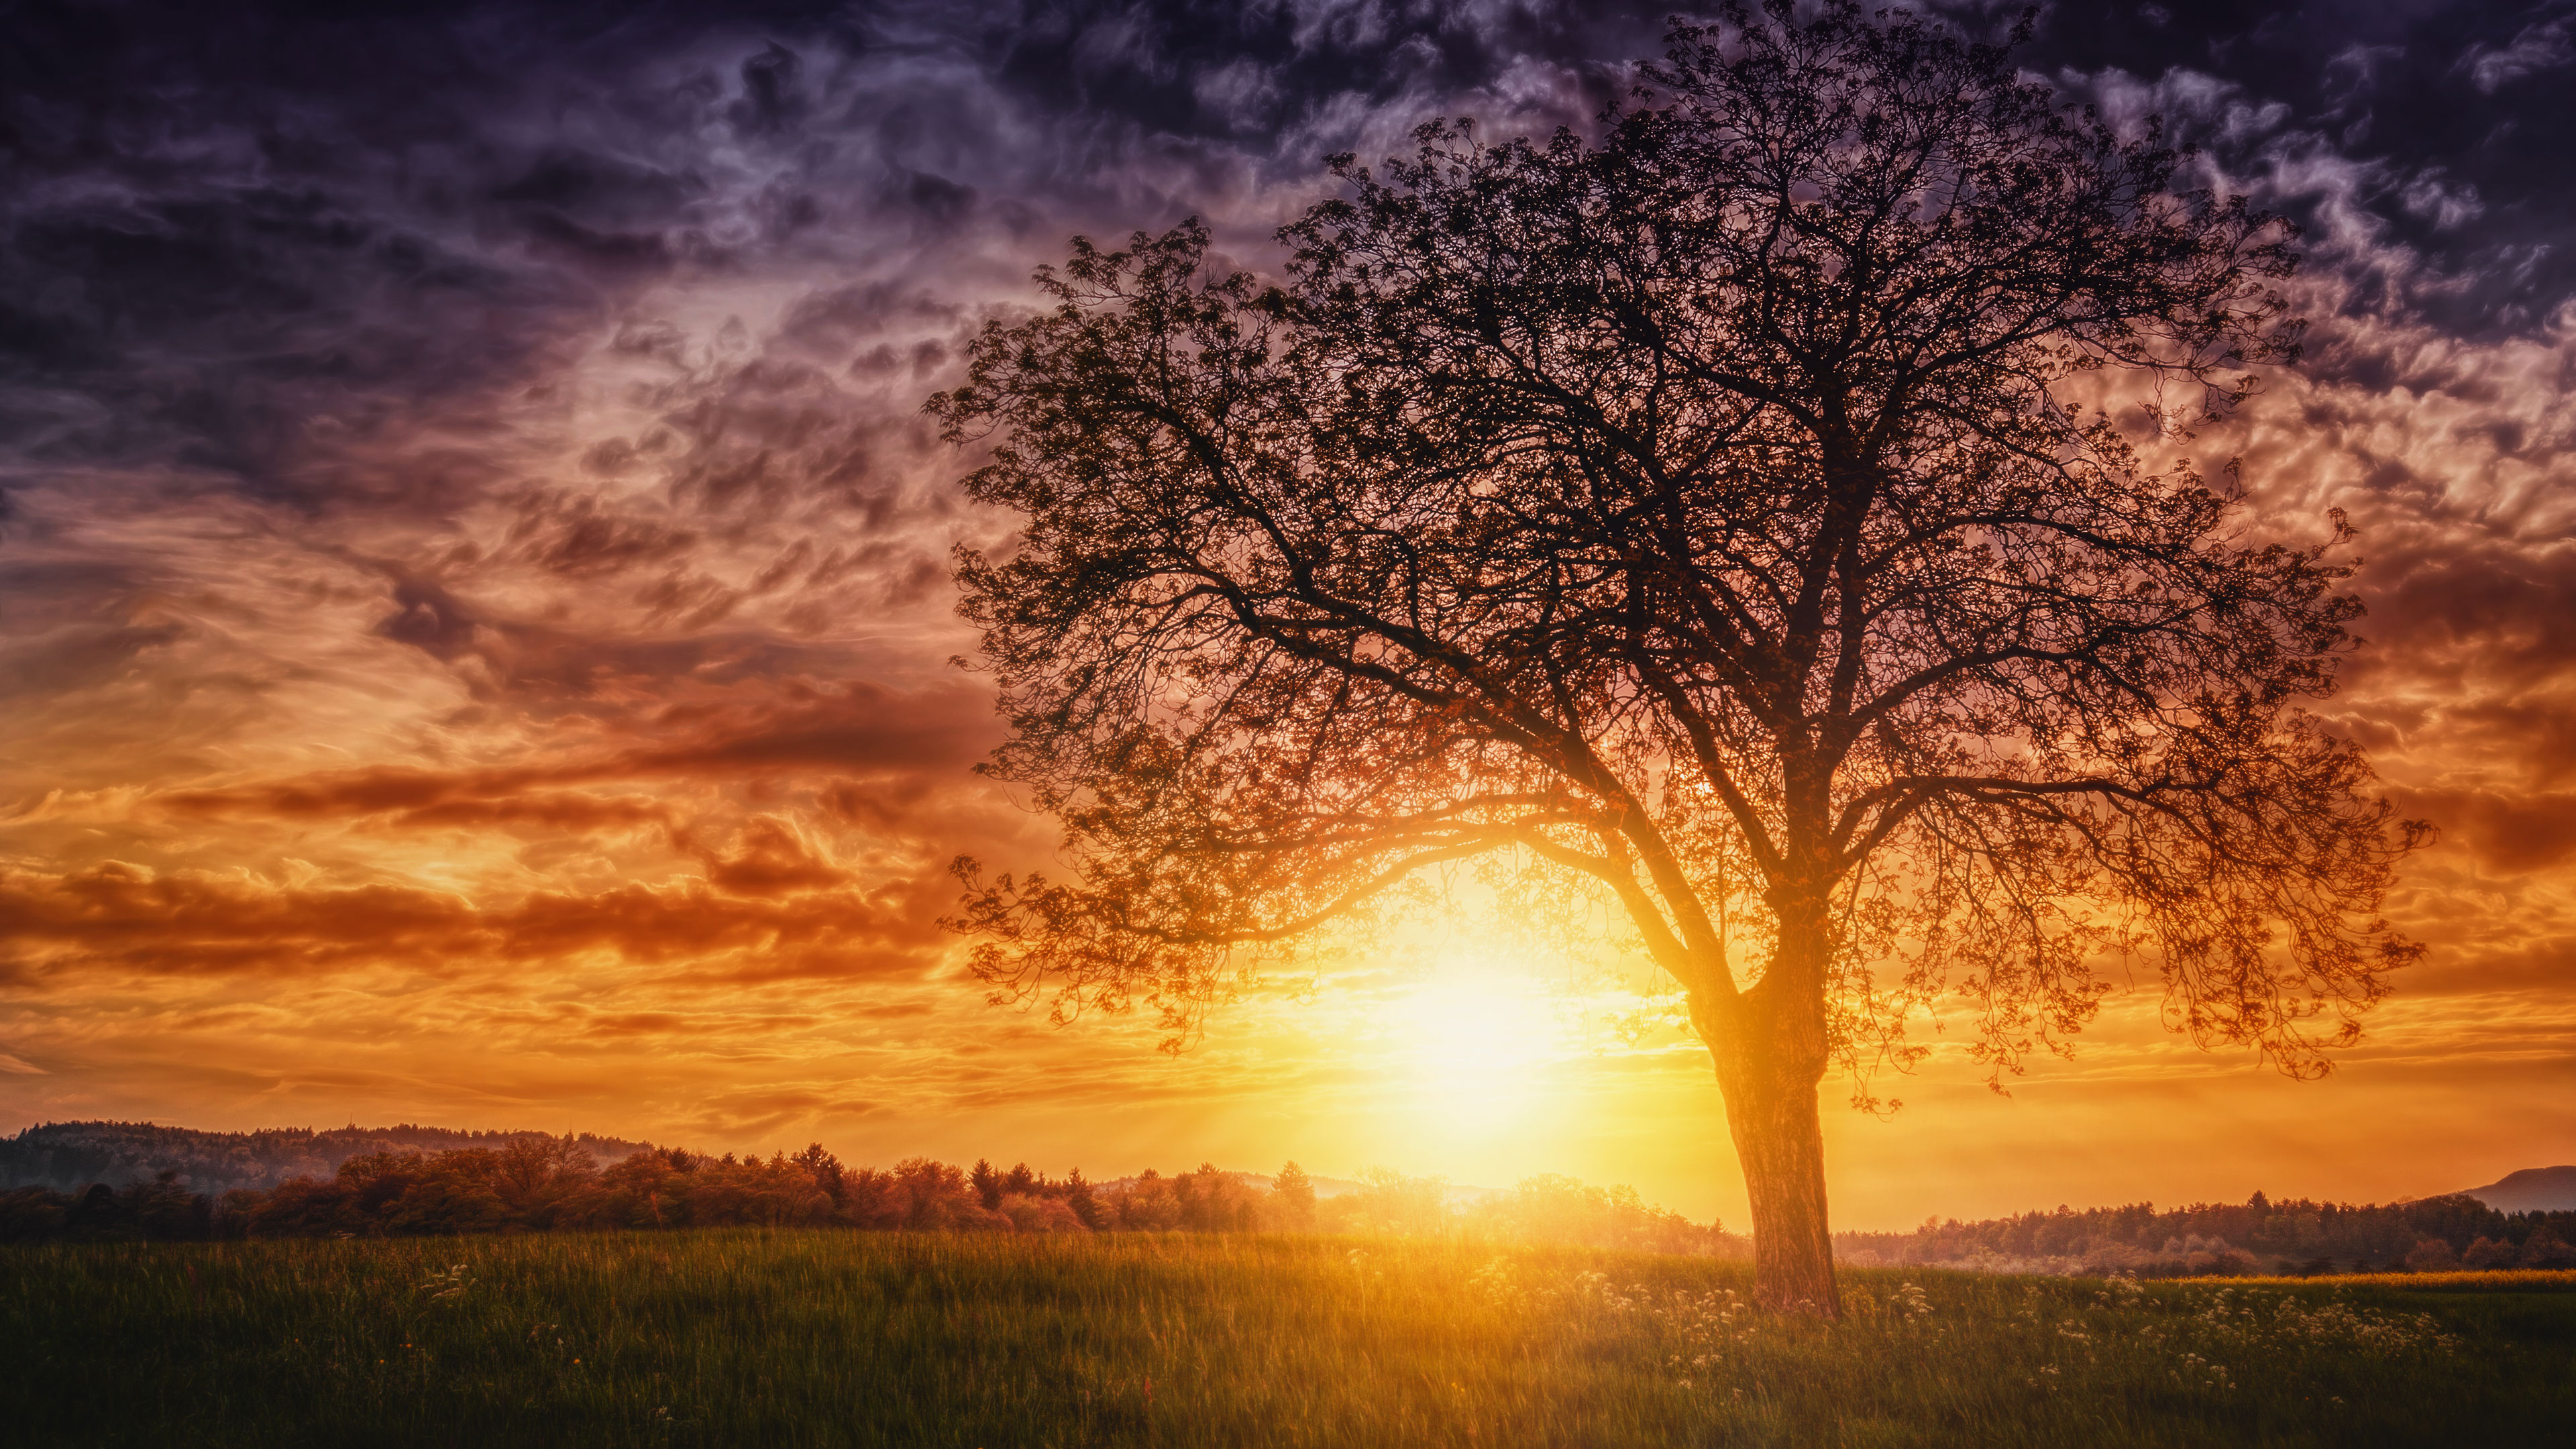 Sunset Nature Trees Wallpaper Hd Nature 4k Wallpapers Images Photos And Background